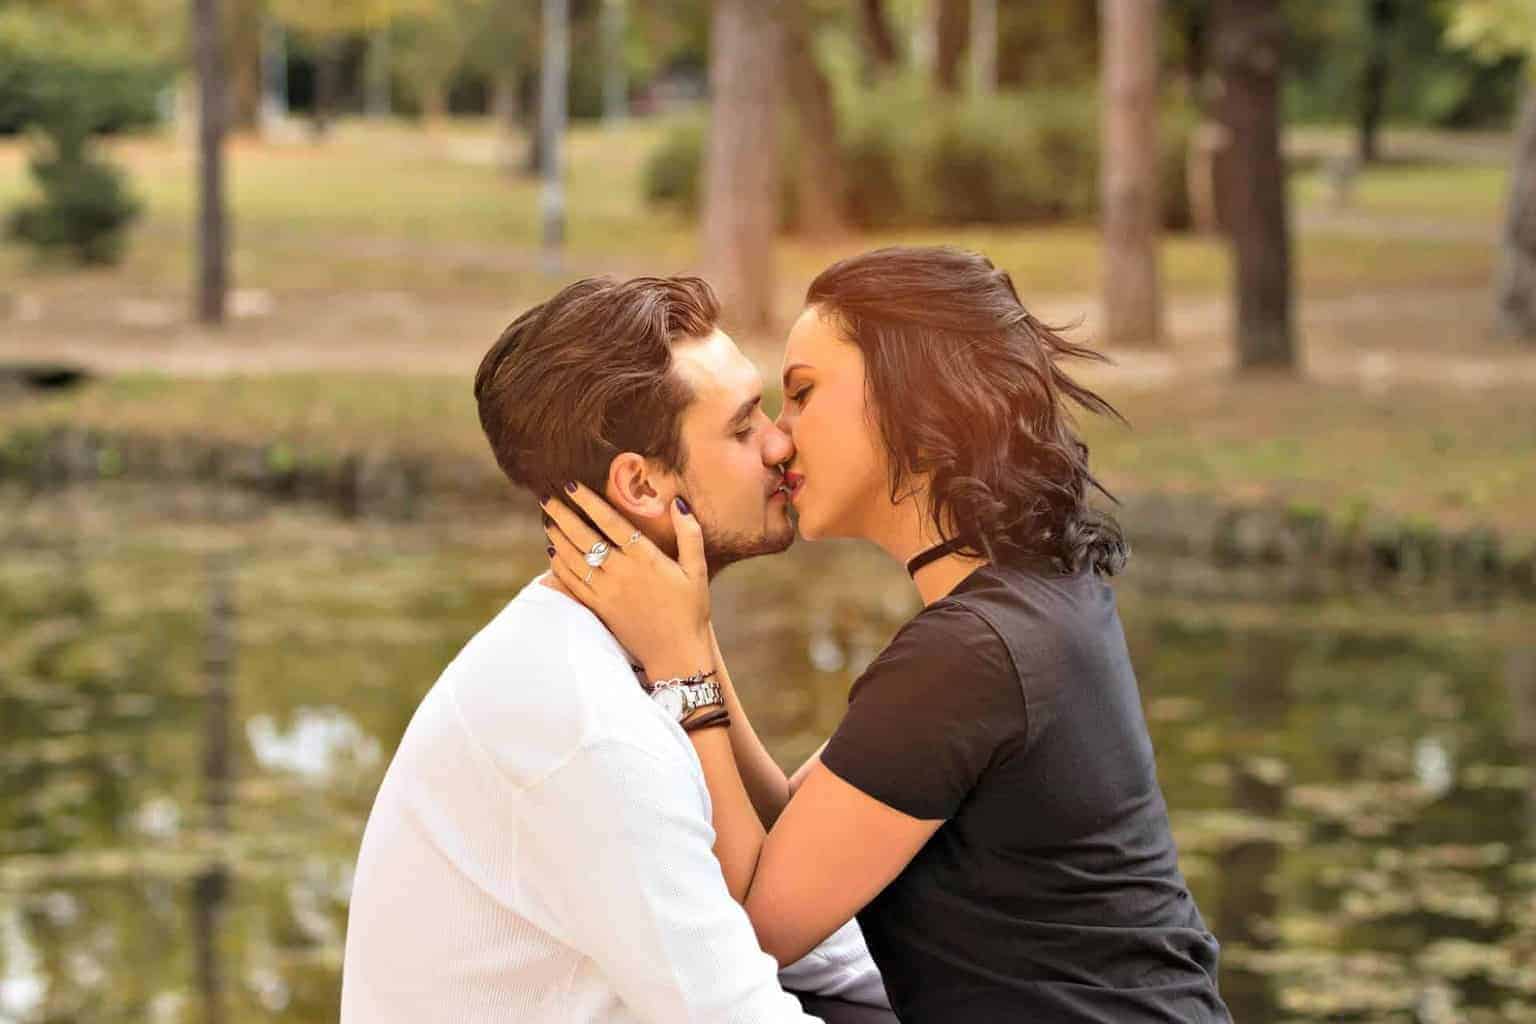 Time a to first the girl kiss tips for » How